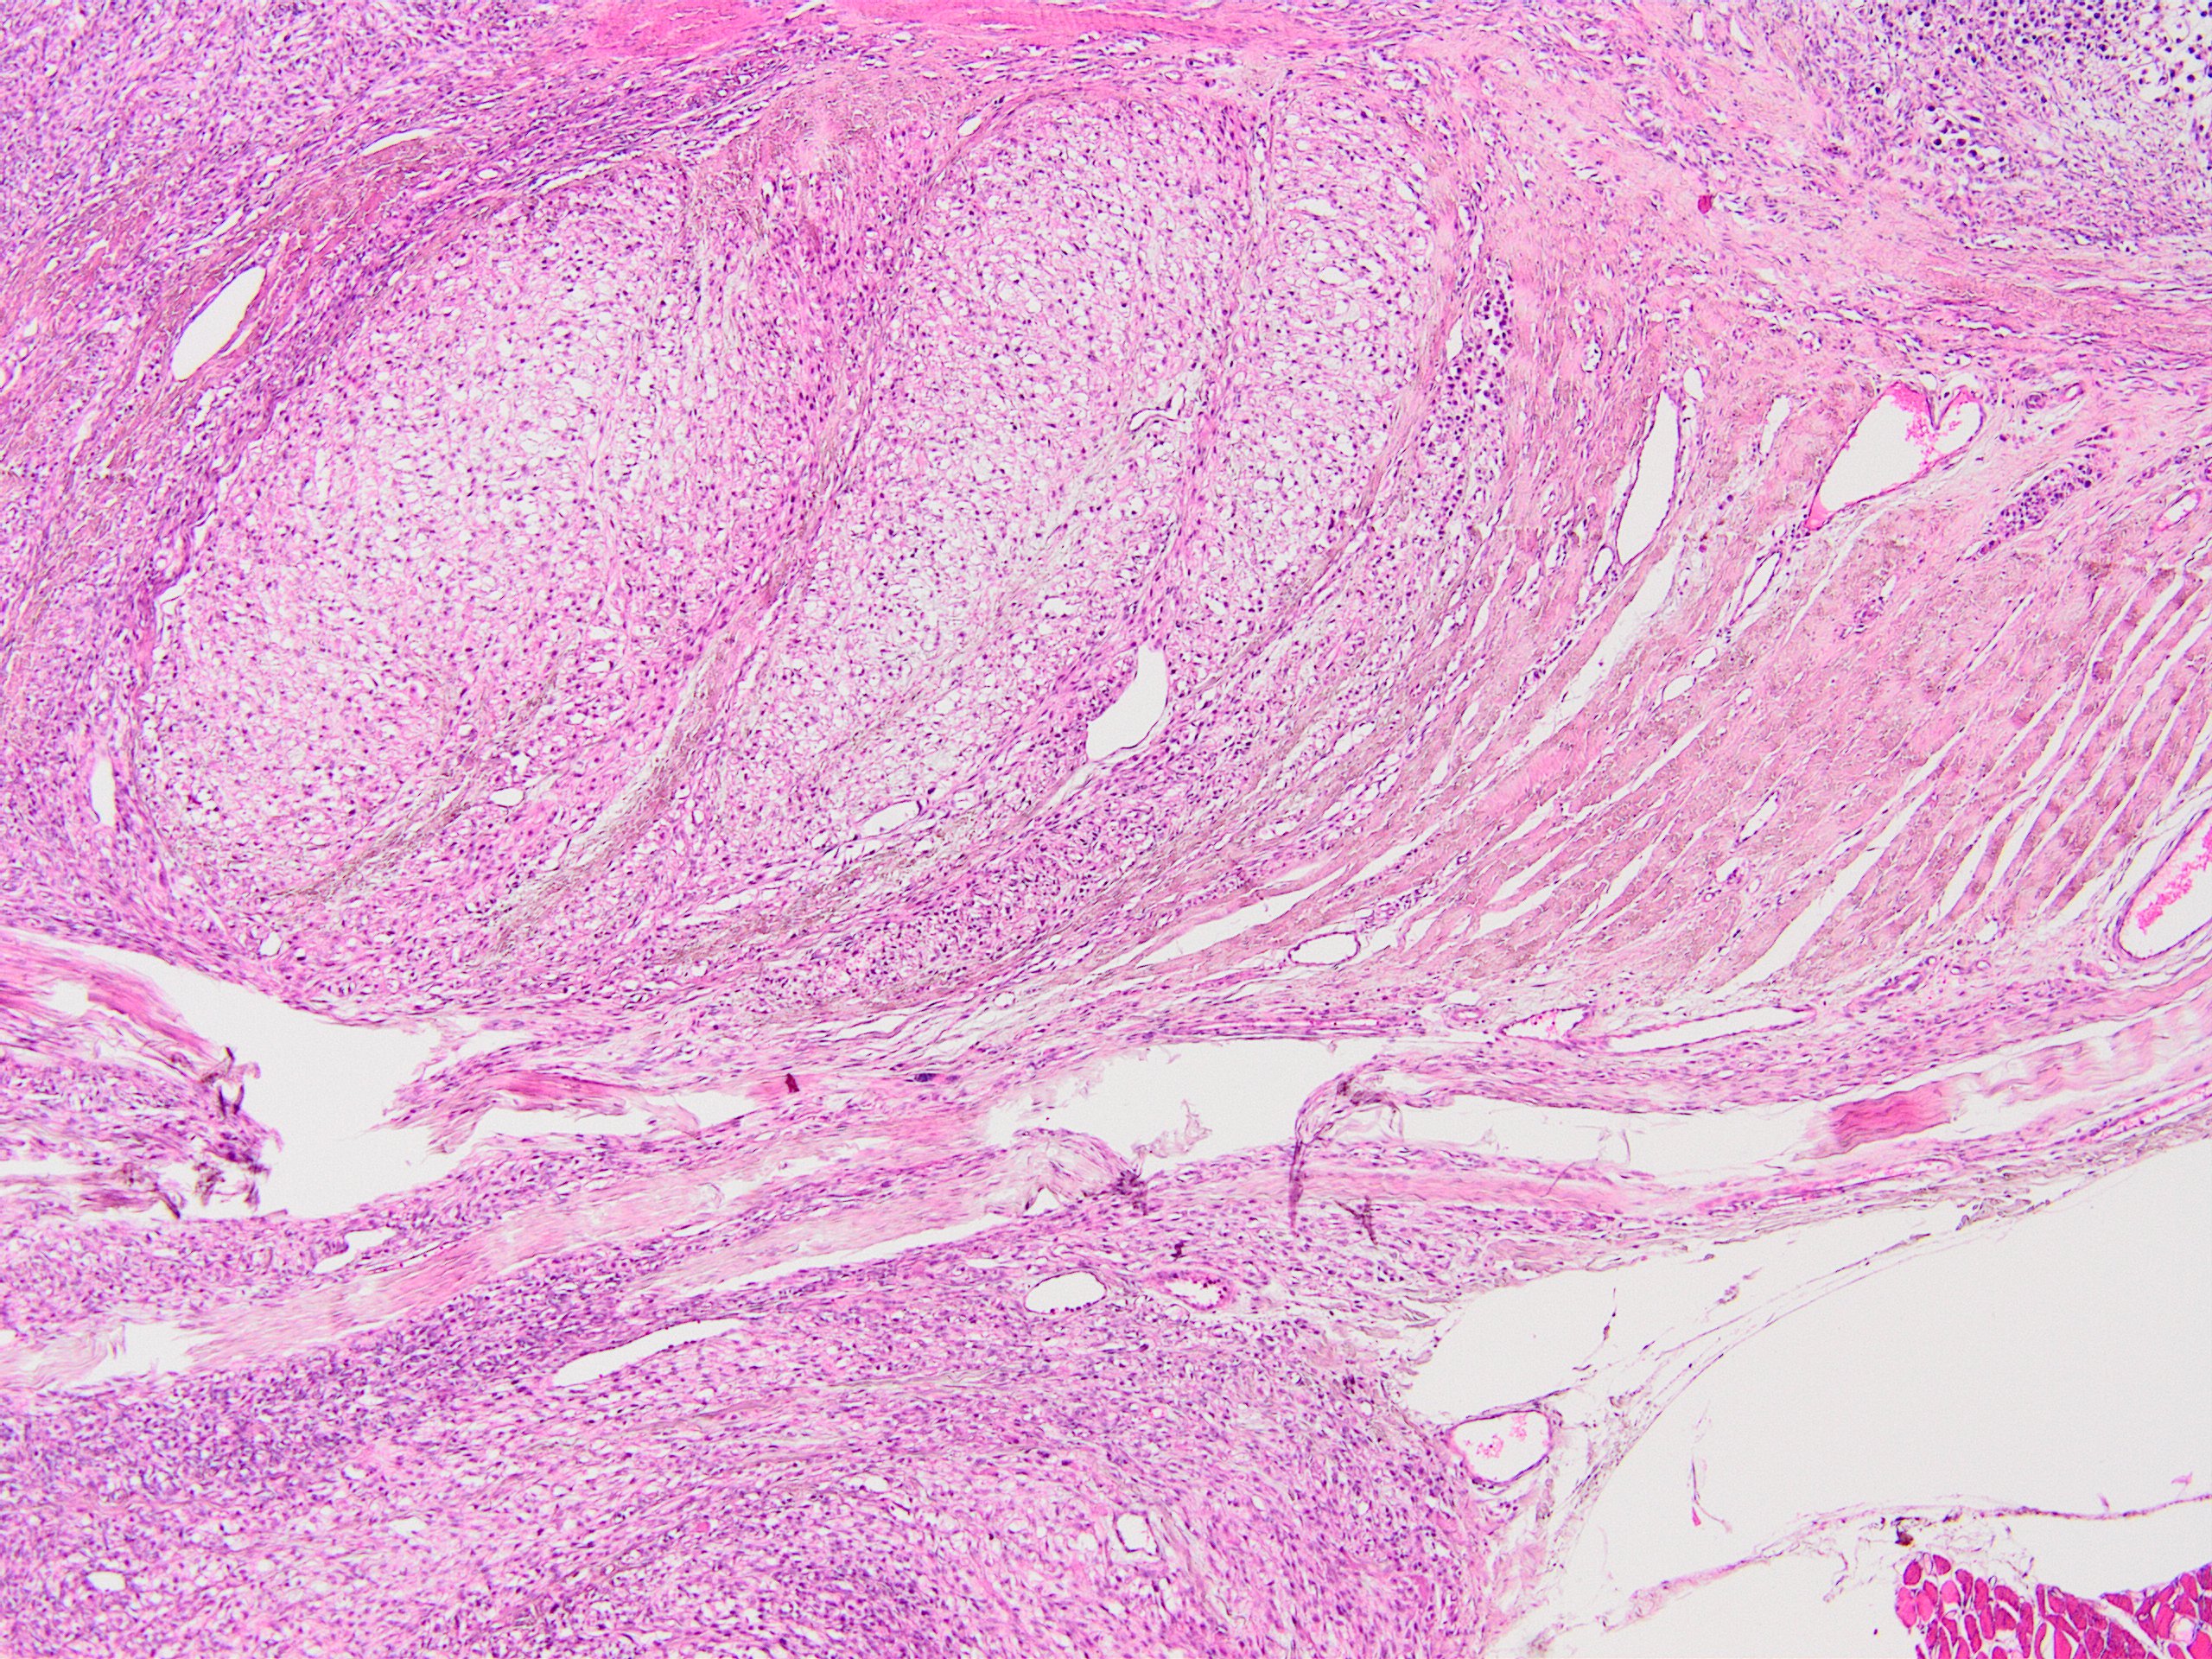 Tumor adjacent to tendon and aponeurosis